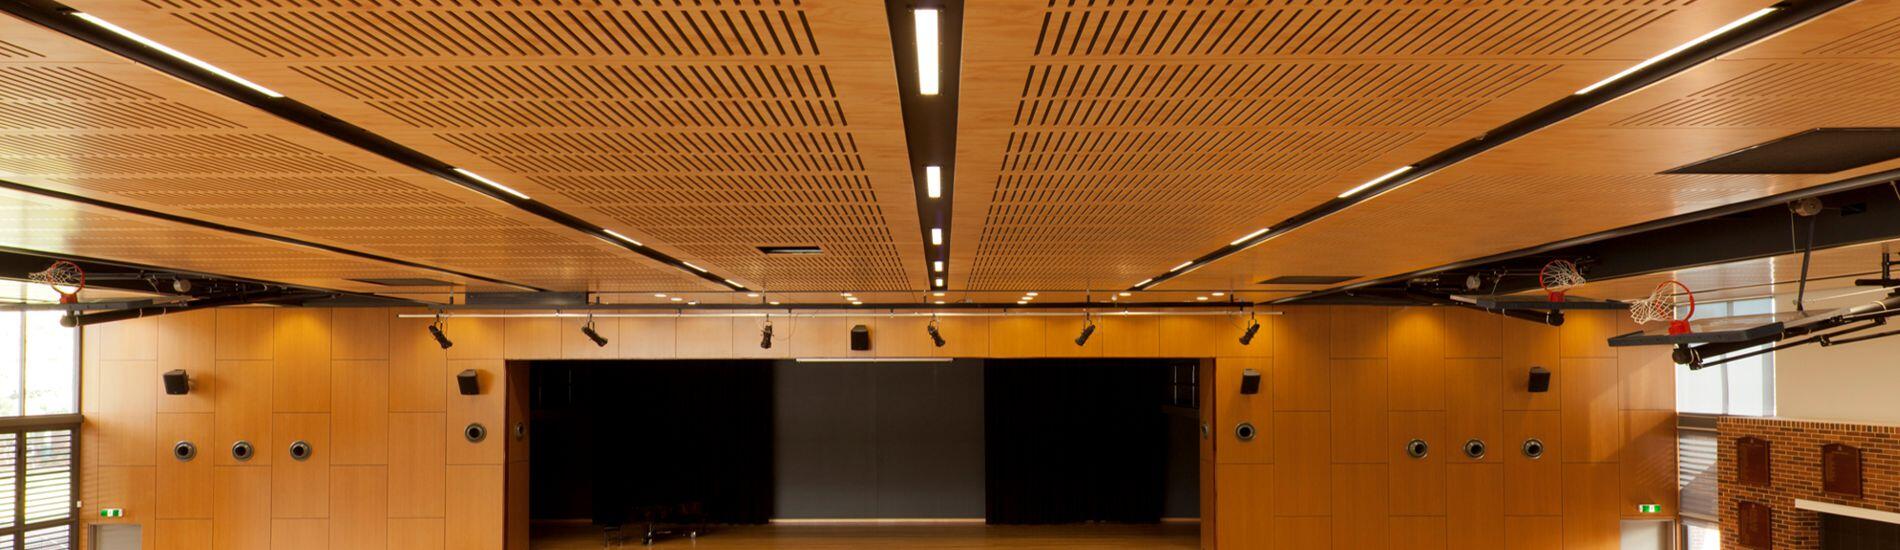 SUPACOUSTIC Acoustic and SUPALINE Decorative Panels A Durable Choice for School’s Multipurpose Hall